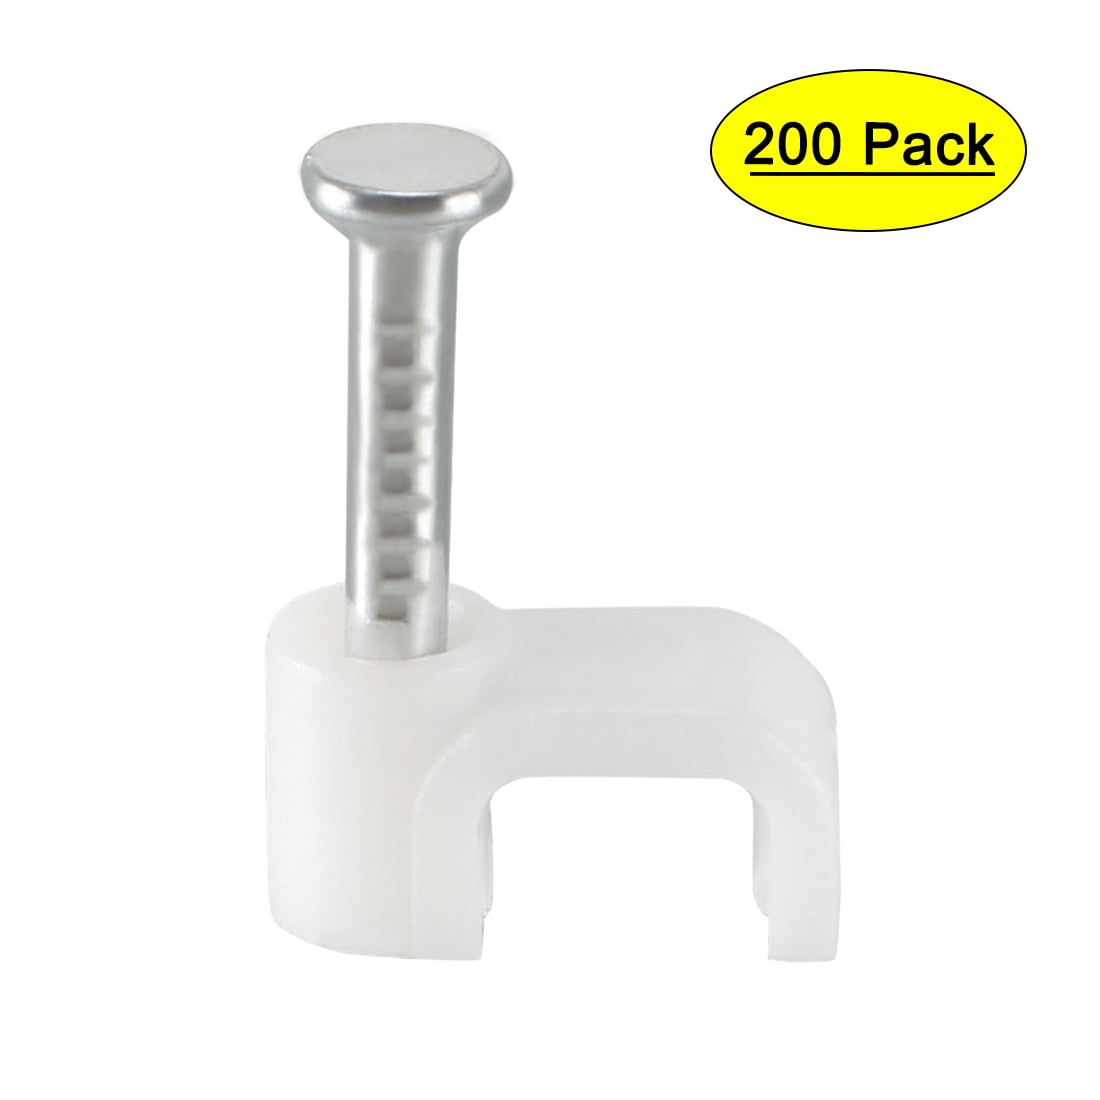 Black White Cable Clips Clamps Nail-In Tidy Tacks Flex Wires Leads Cords 6,7,8mm 